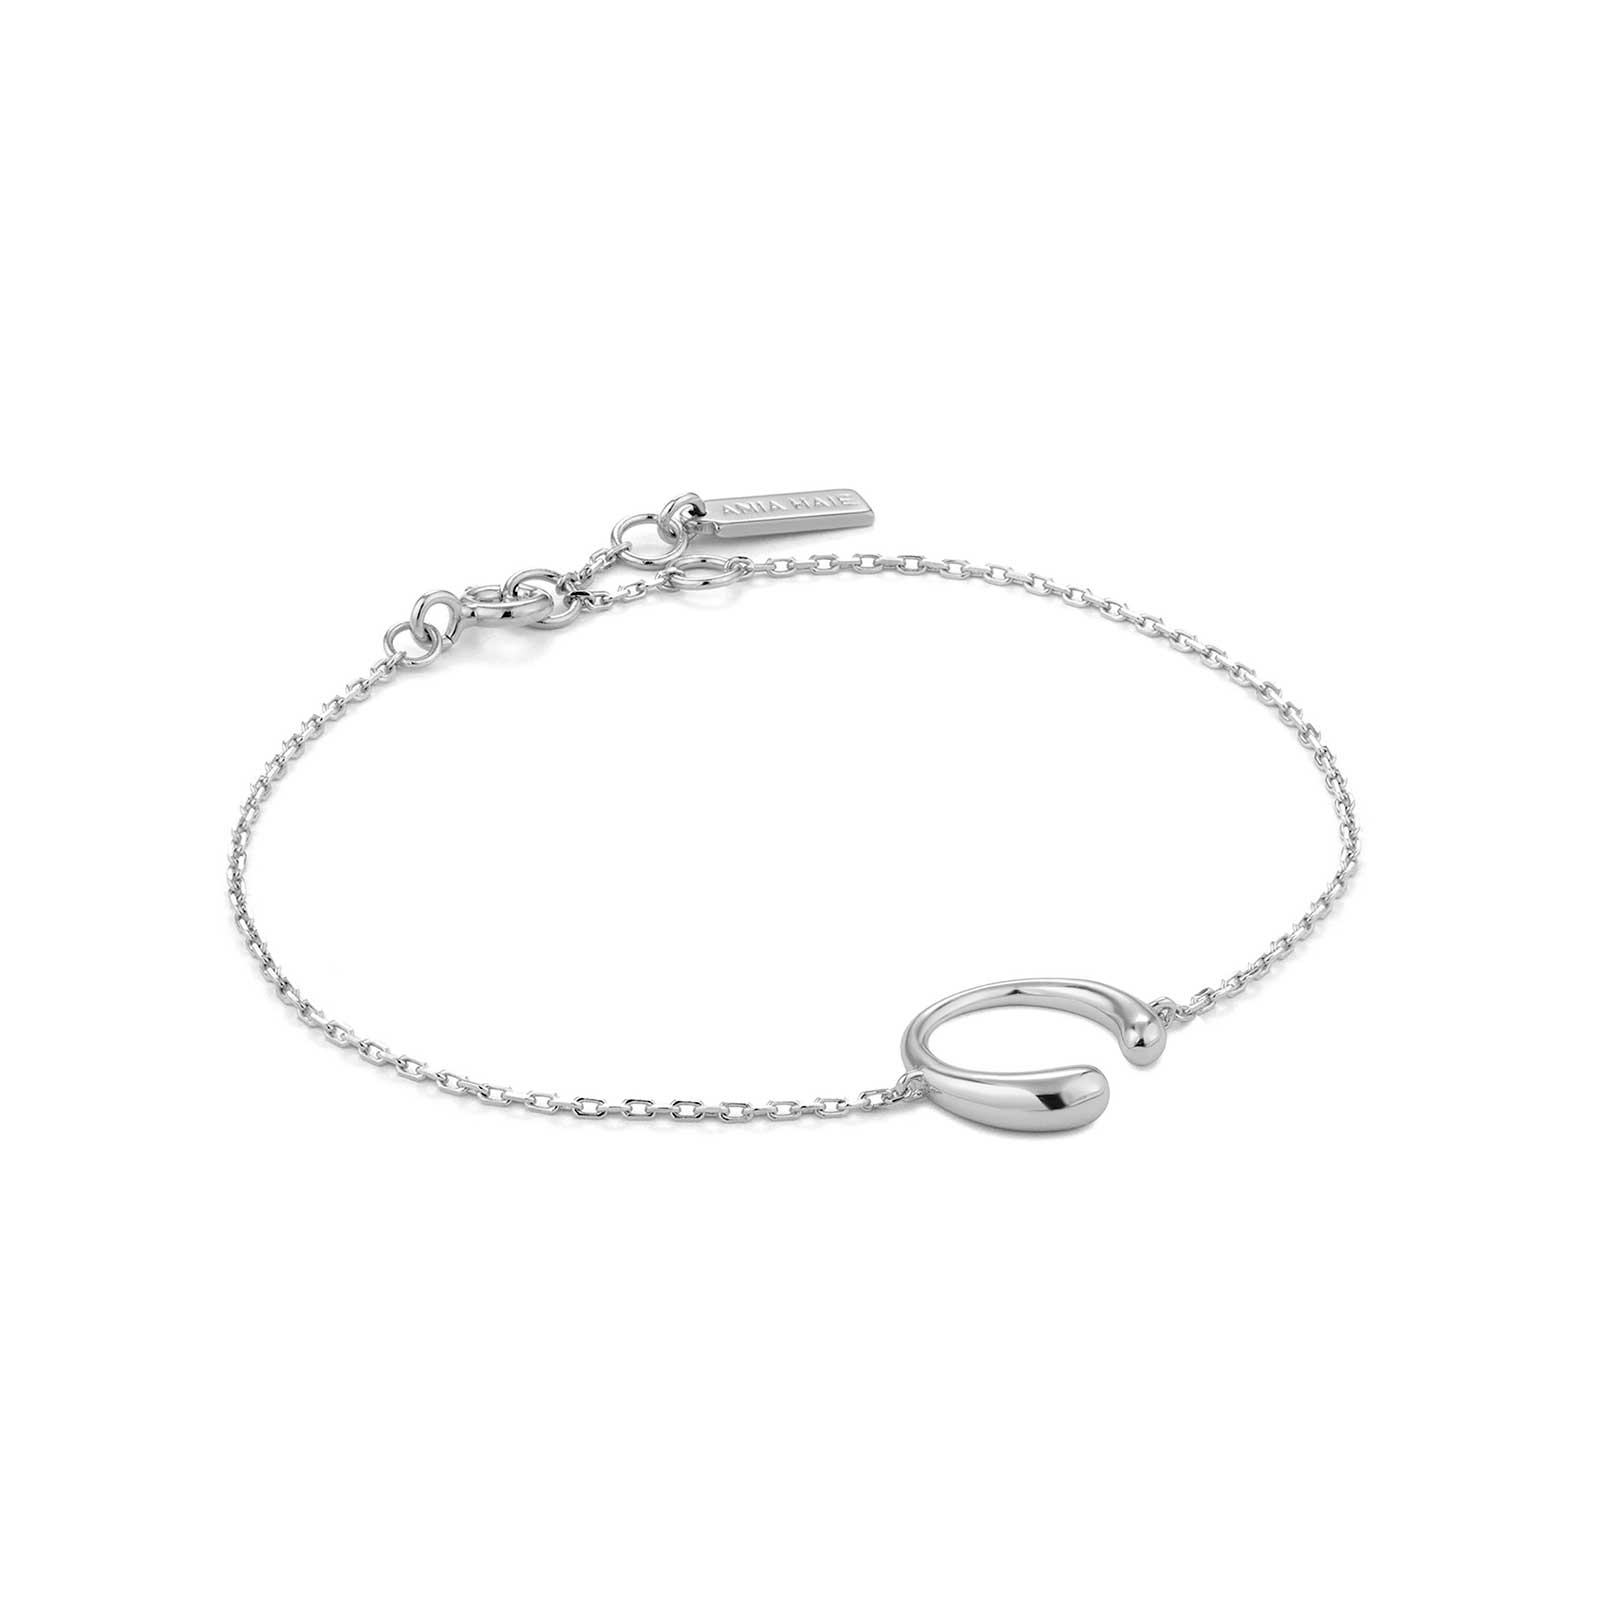 Ania Haie Luxe Curve Bracelet, Sterling Silver: Precious Accents, Ltd.